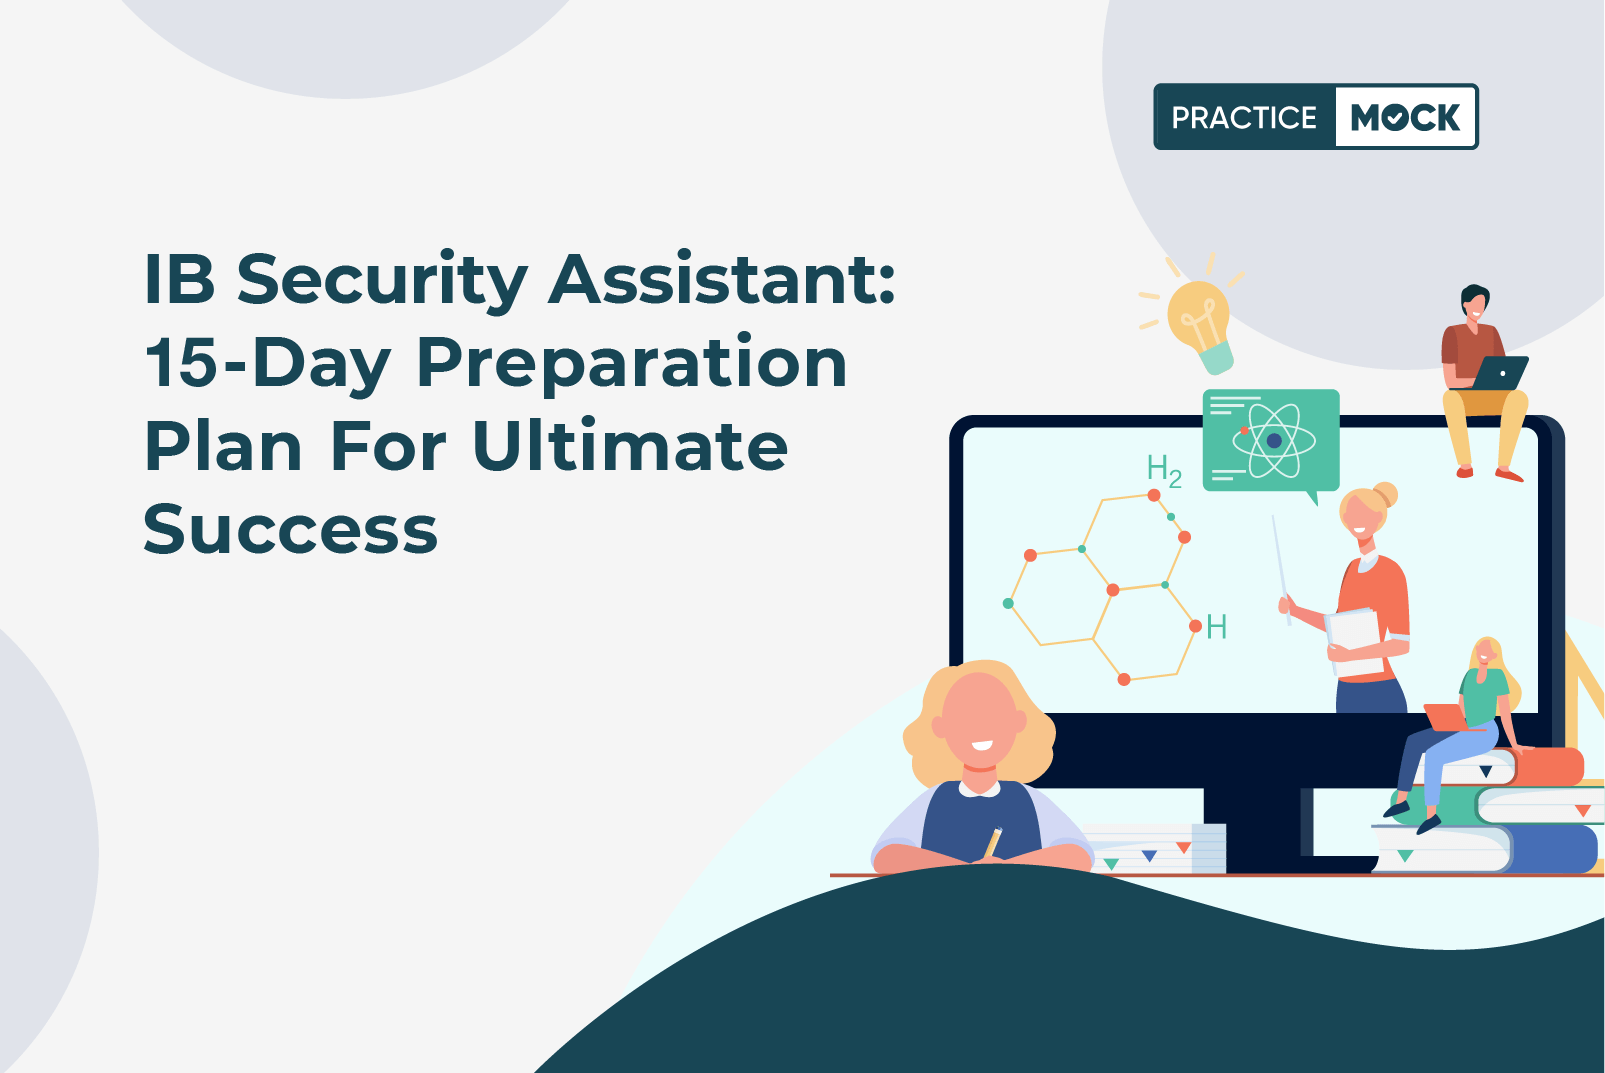 IB Security Assistant: 15-Day Preparation Plan for Ultimate Success